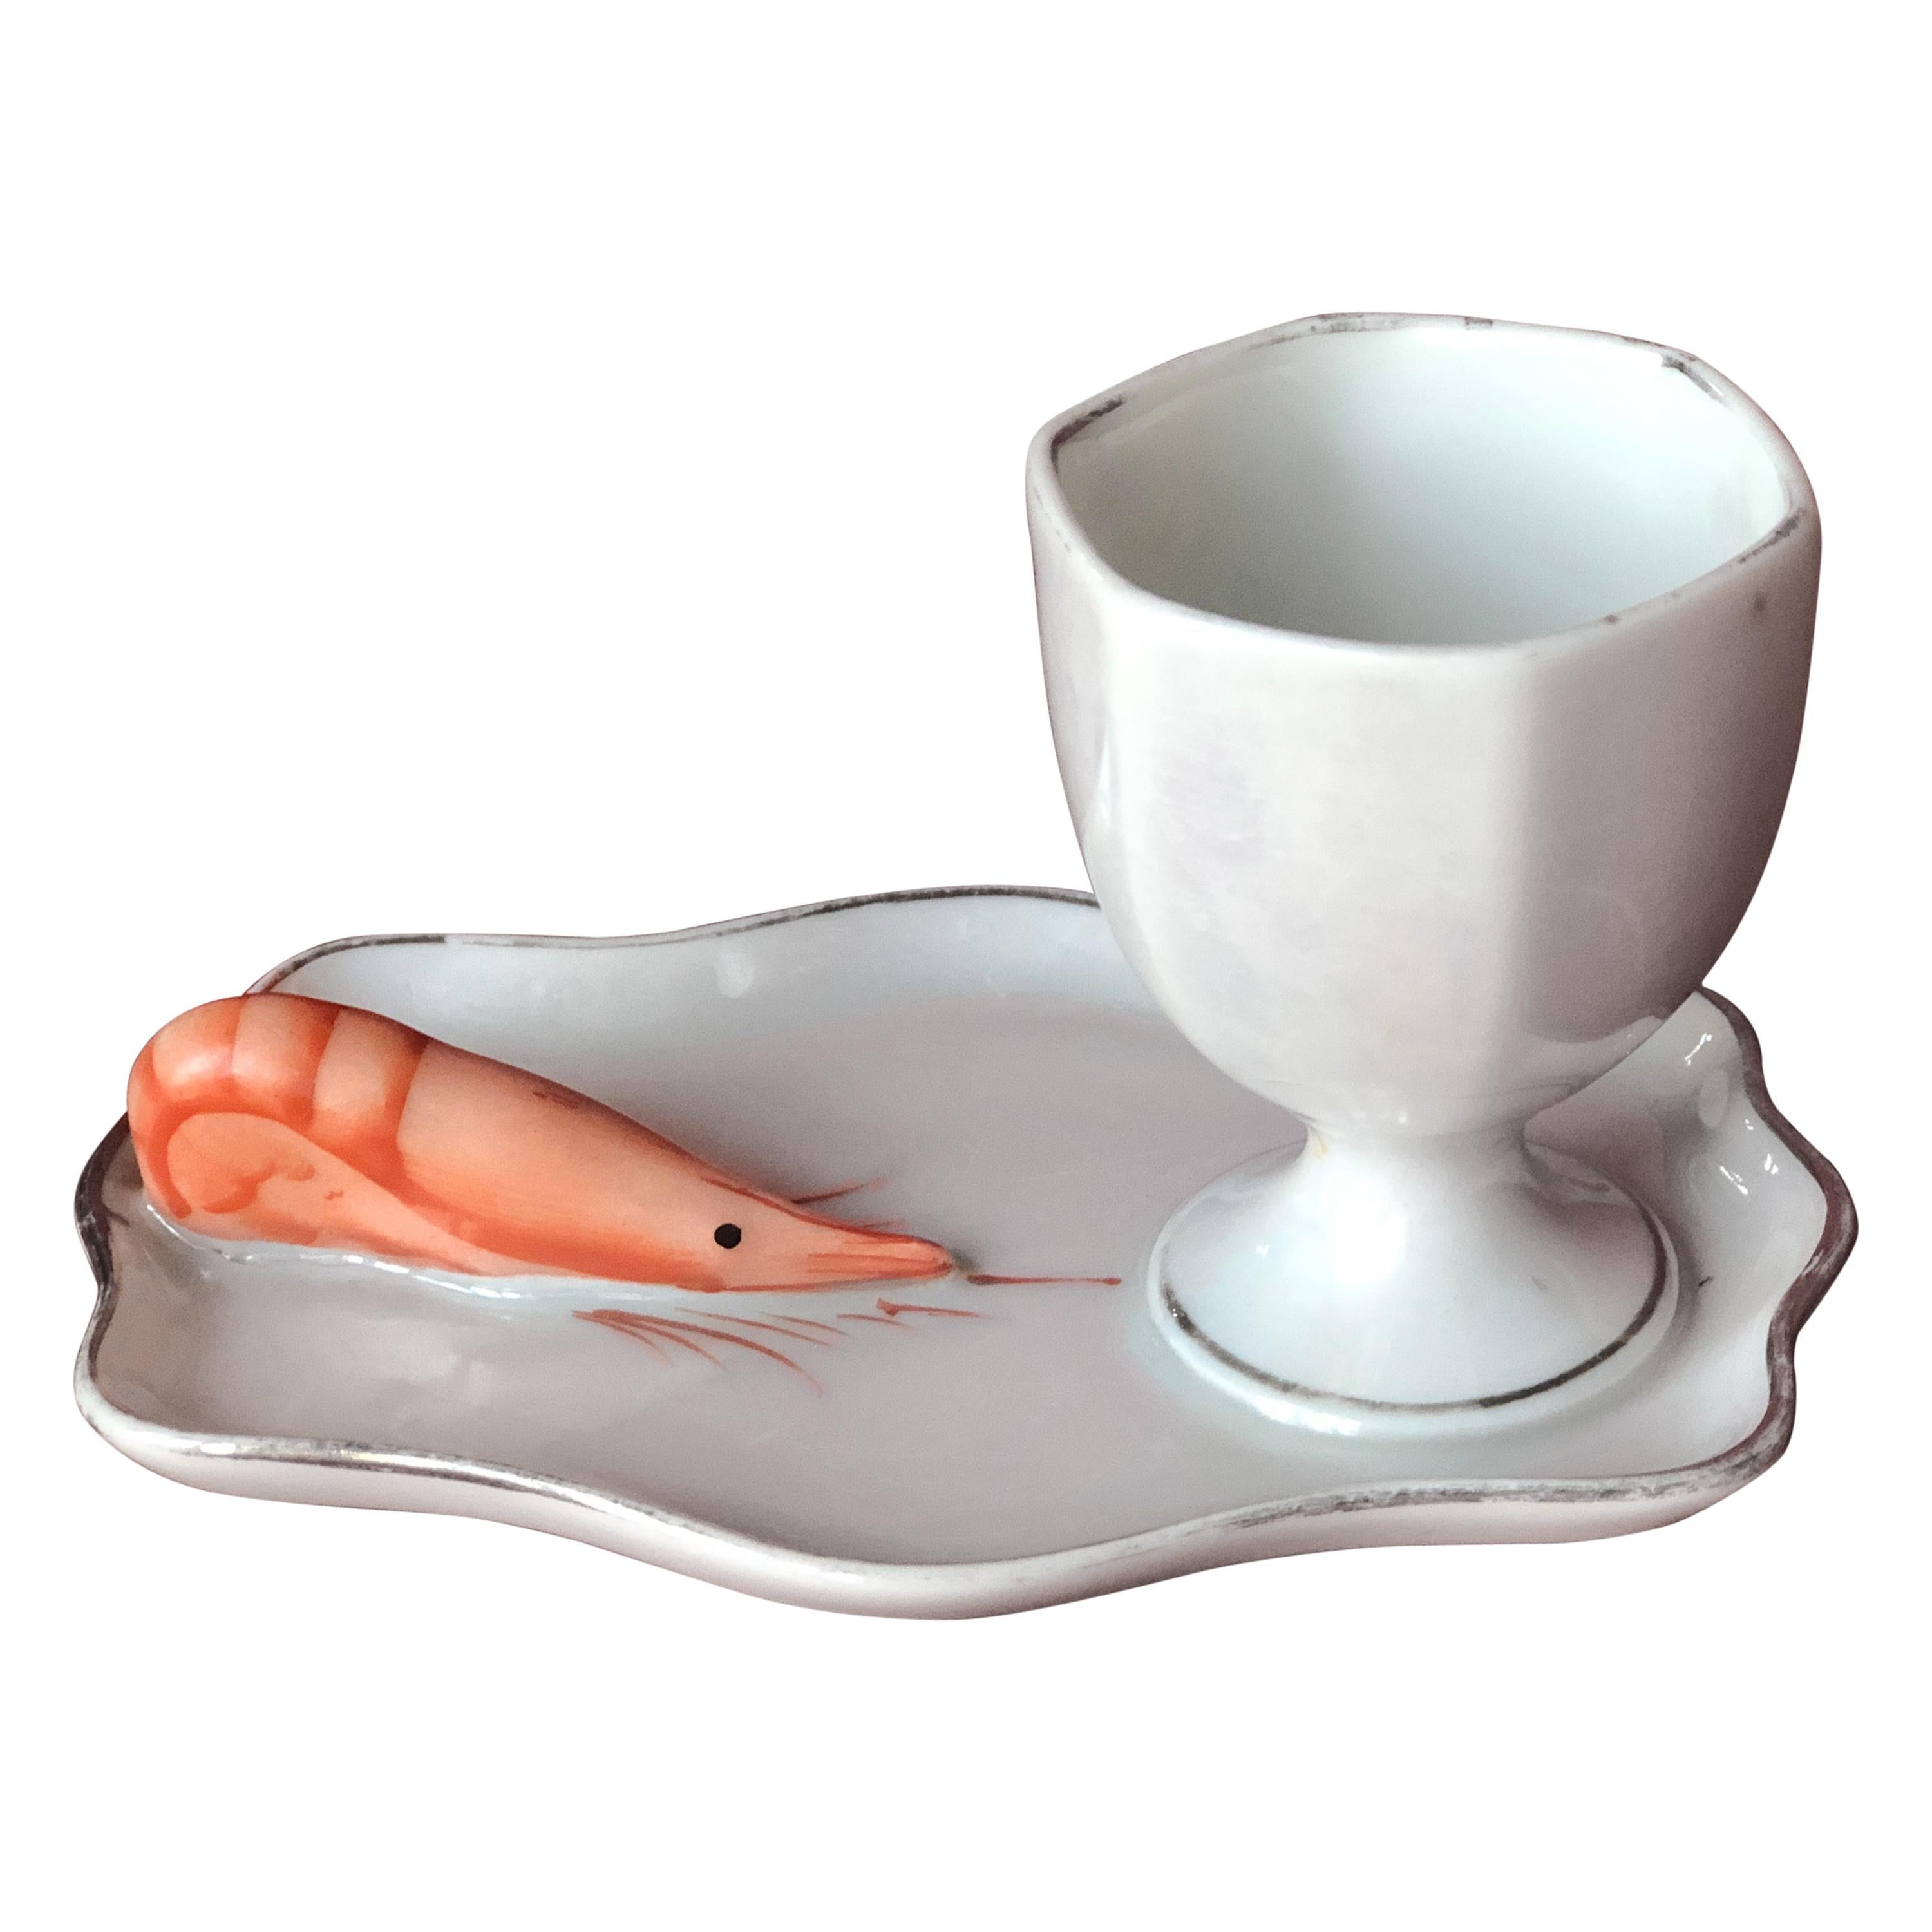 https://a.1stdibscdn.com/rare-french-porcelain-egg-cup-with-a-shrimp-aside-by-dadat-limoge-for-sale/1121189/f_153375521563198598183/15337552_master.jpg